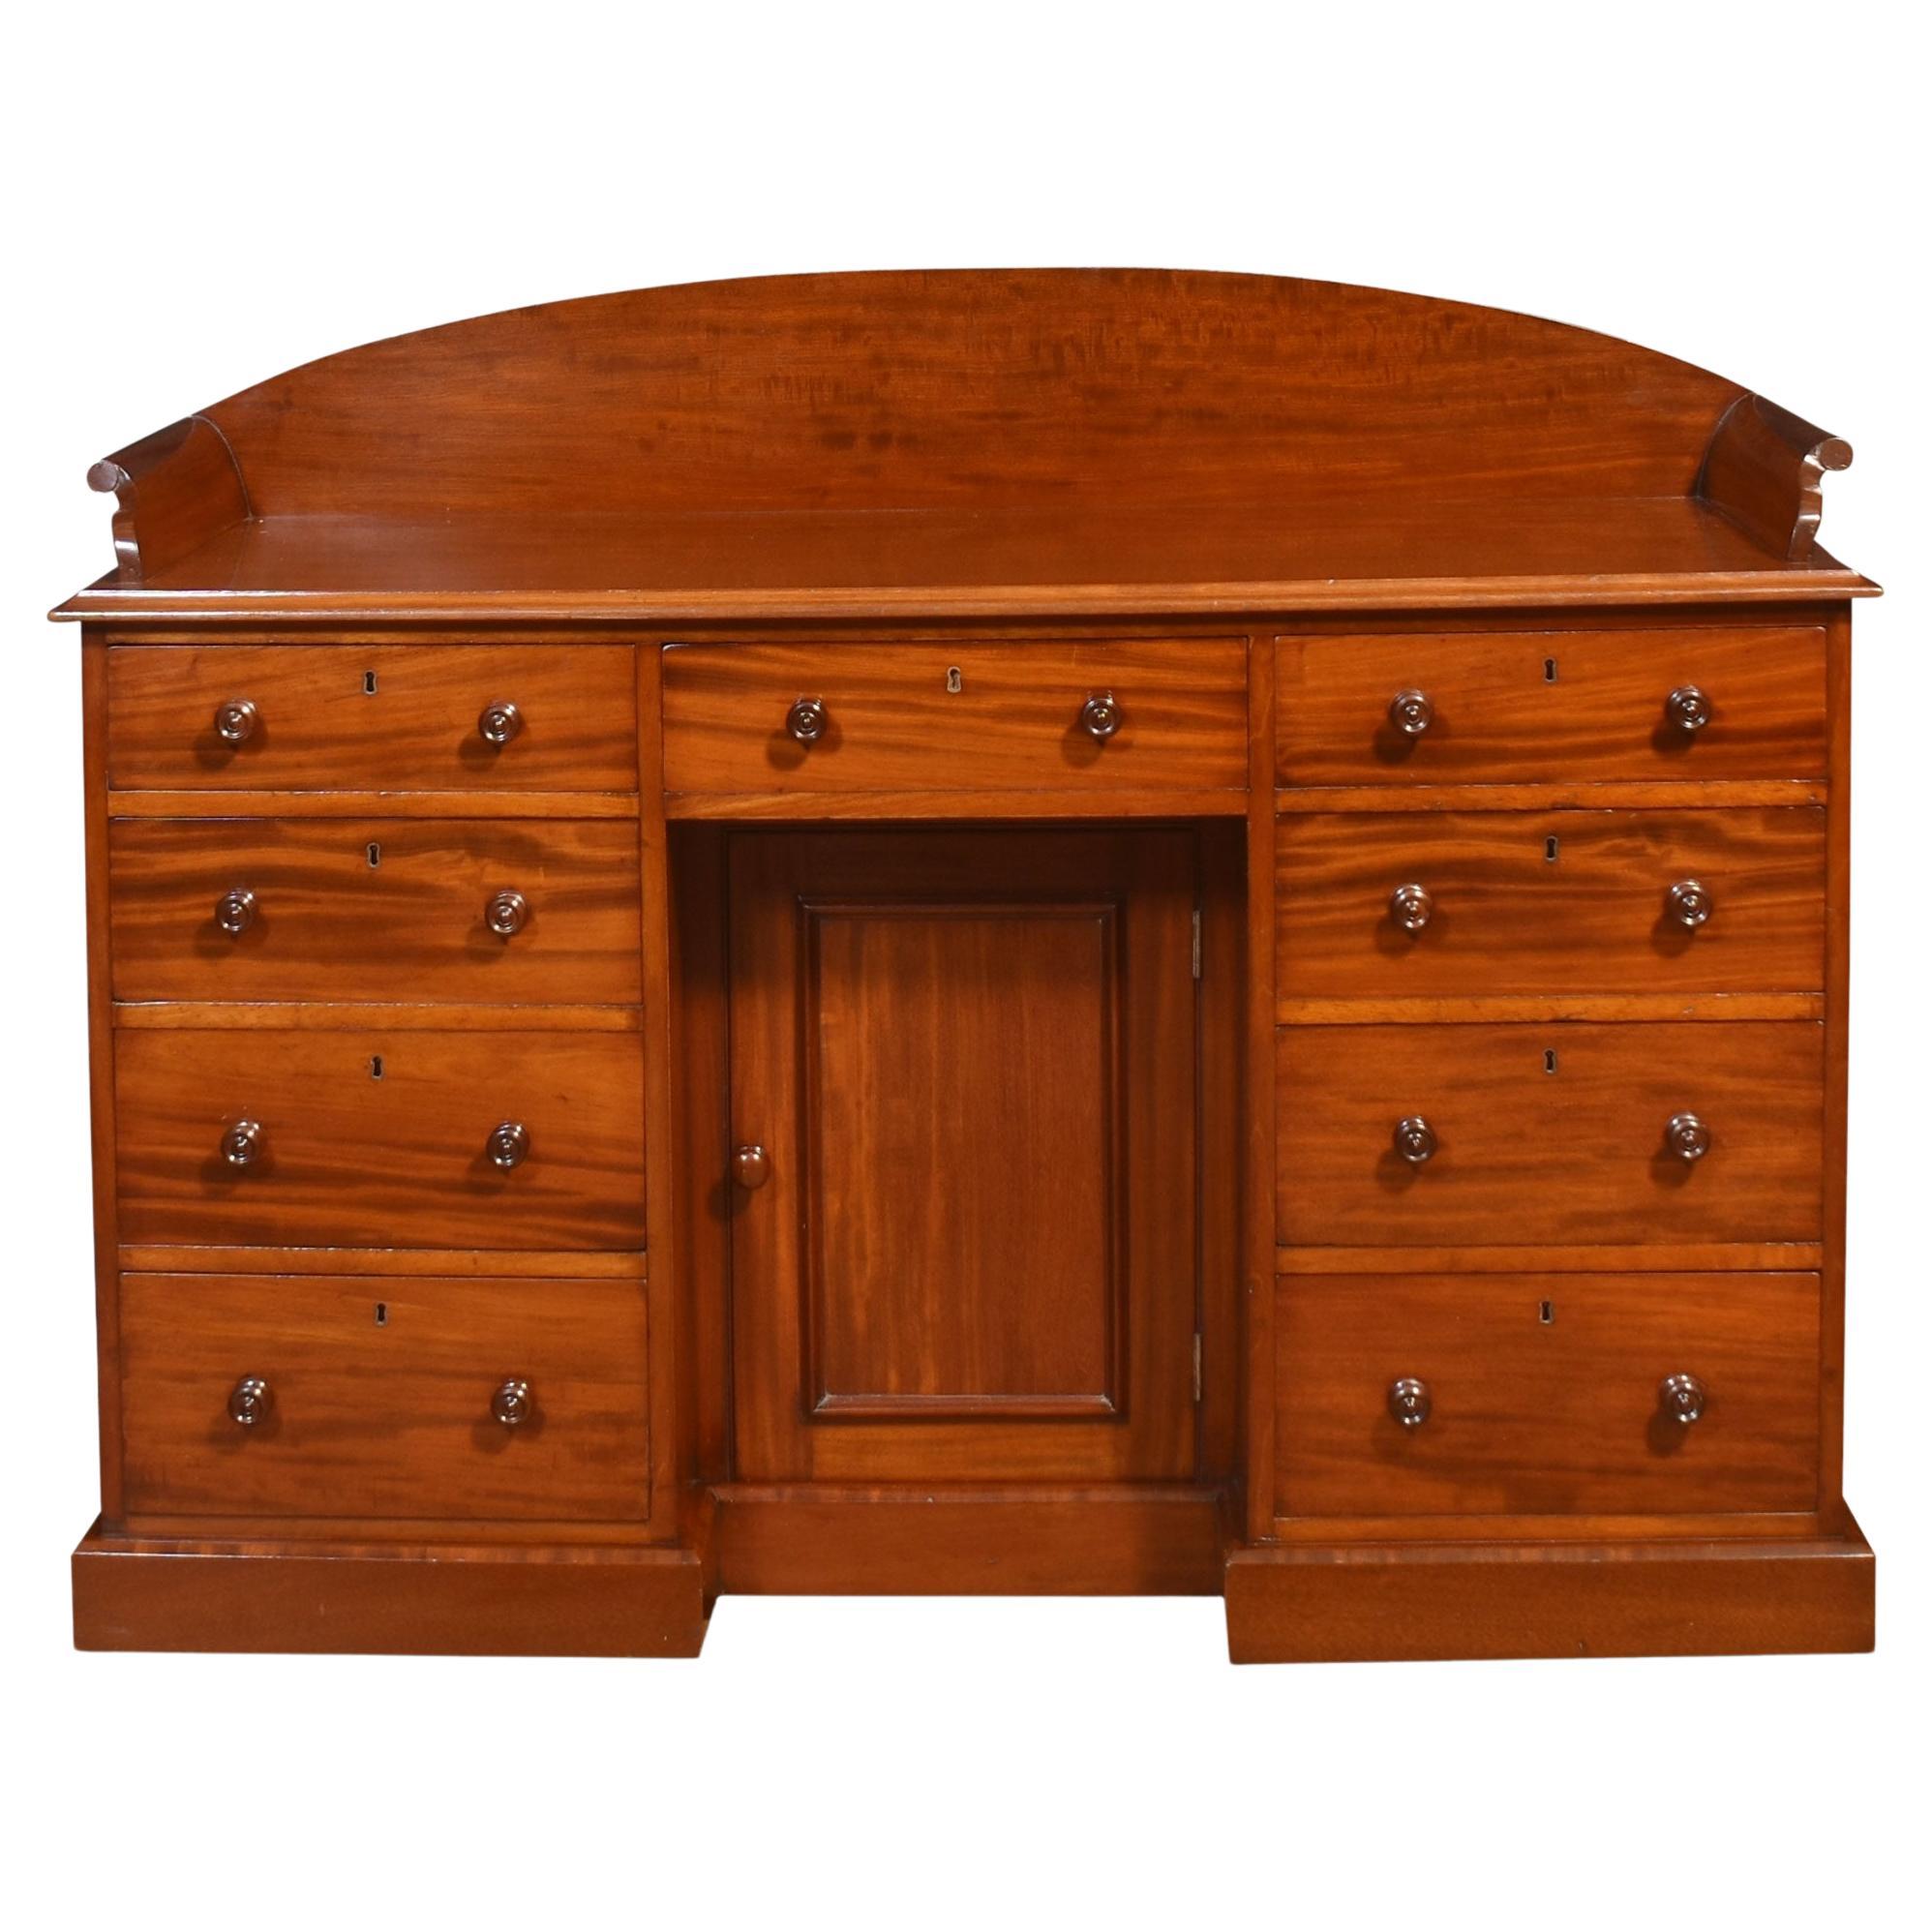 19th century mahogany dressing table For Sale